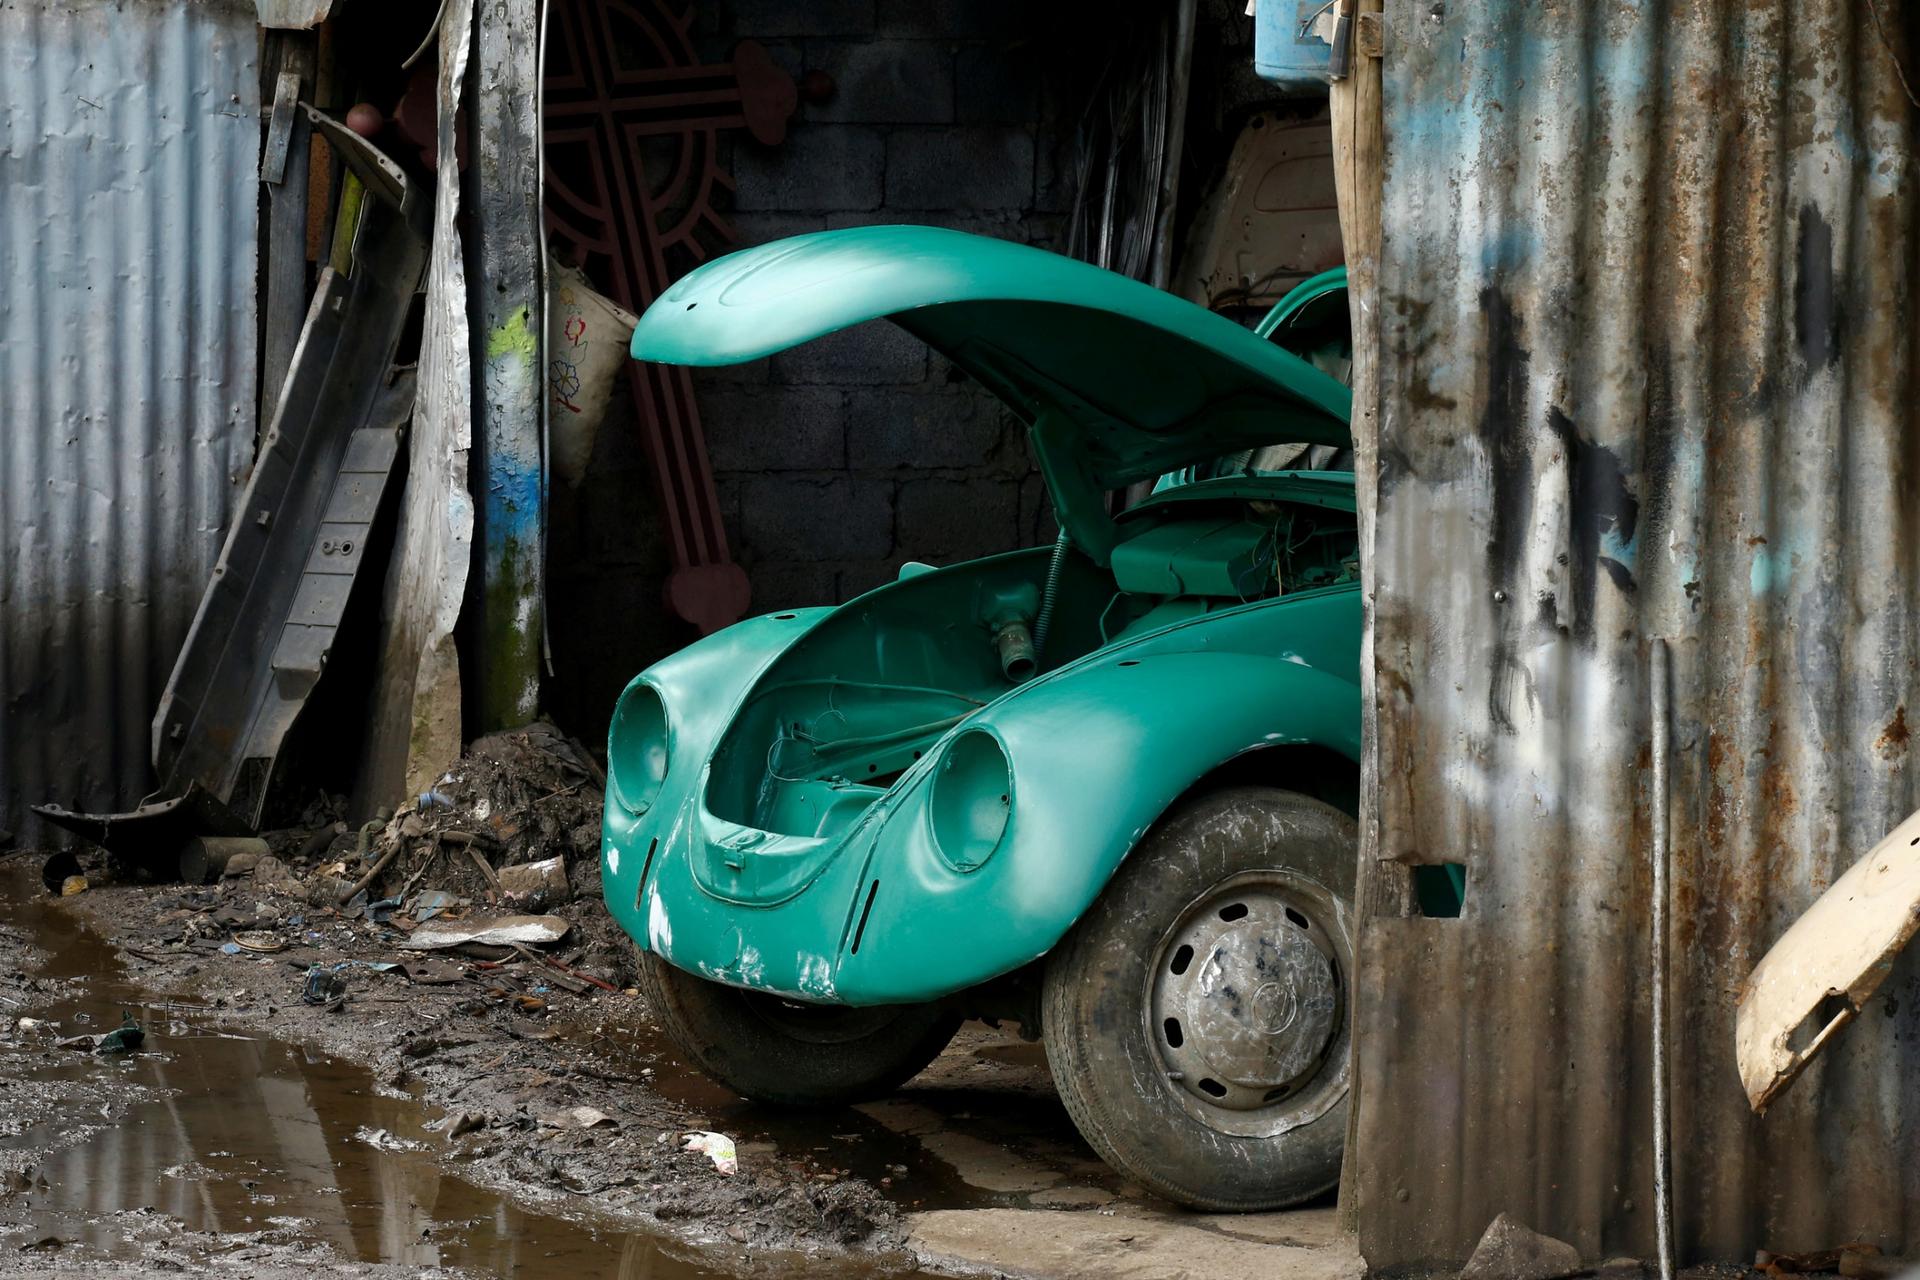 The front end of a Volkswagen Beetle is shown sticking out from a metal garage.